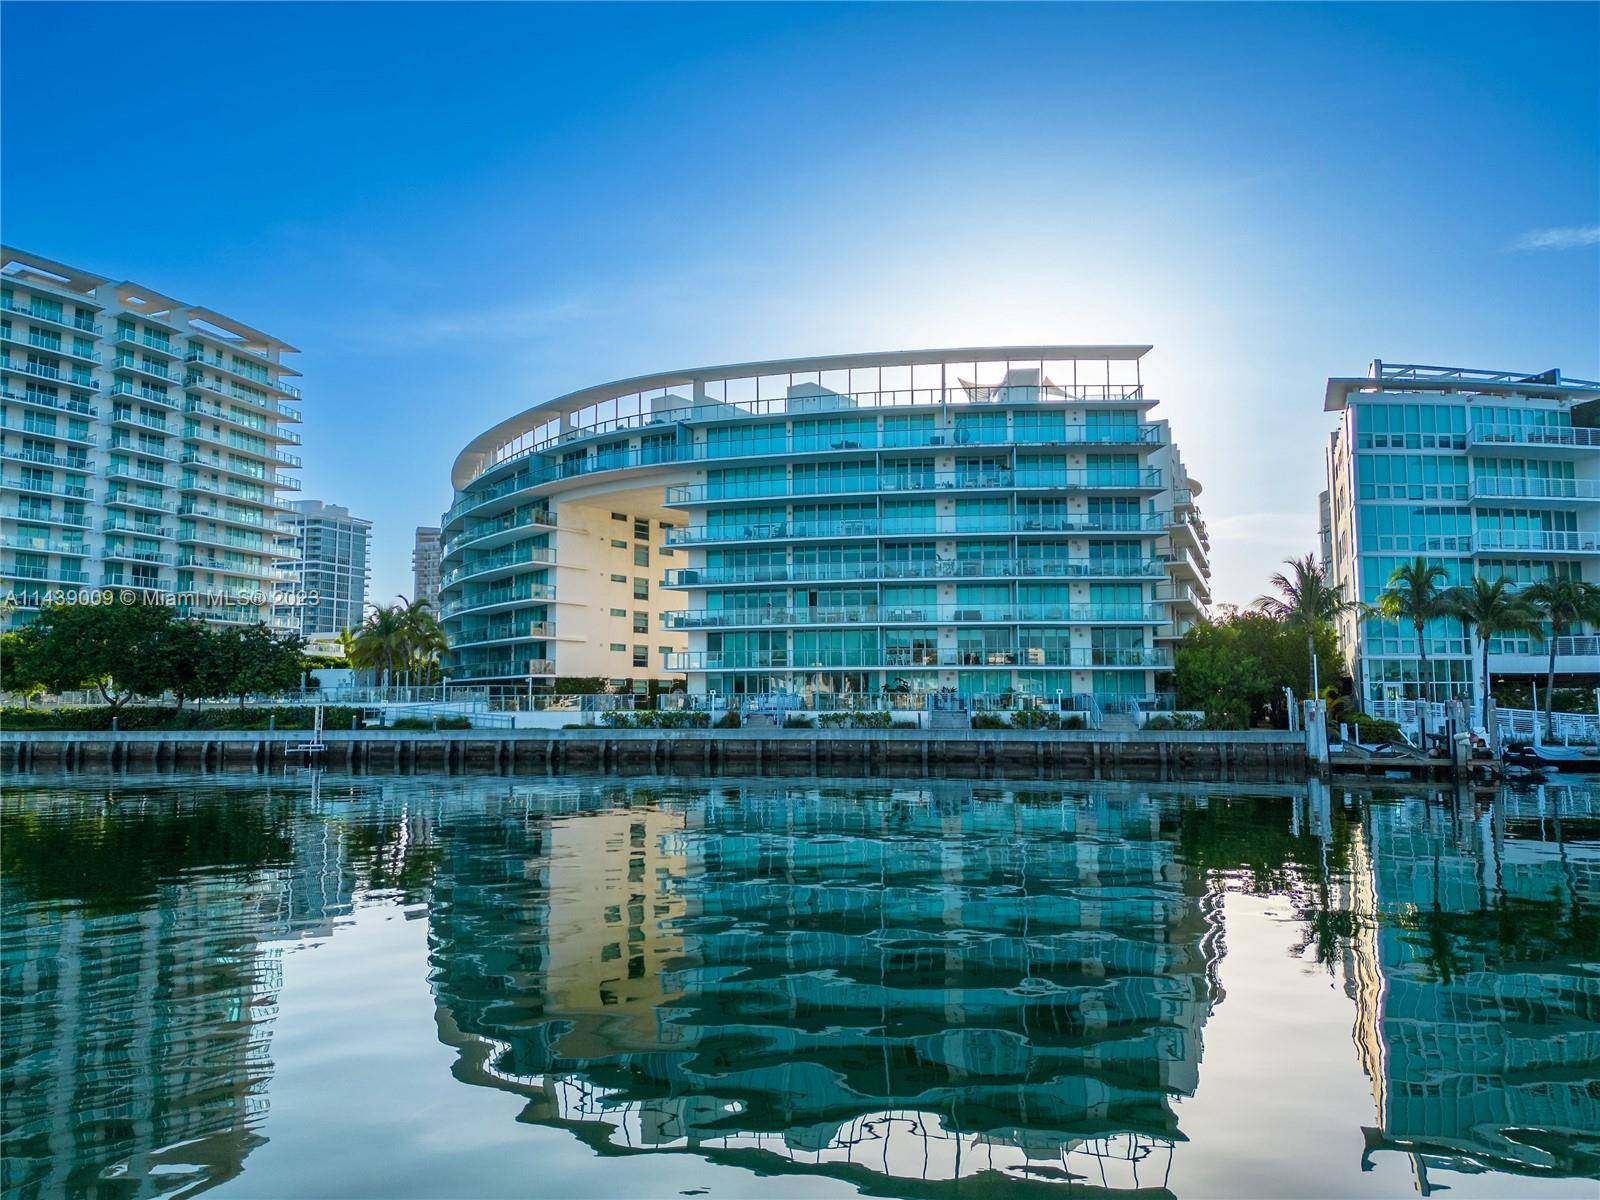 AMAZING 2BEDS 2BATHS WATER FORNT CORNER UNIT WITH STUNNING UNOBSTRUCTED VIEWS OF THE INTRACOASTAL, BAY AND MIAMI SKYLINE IN LUXURY BOUTIQUE CONDO.